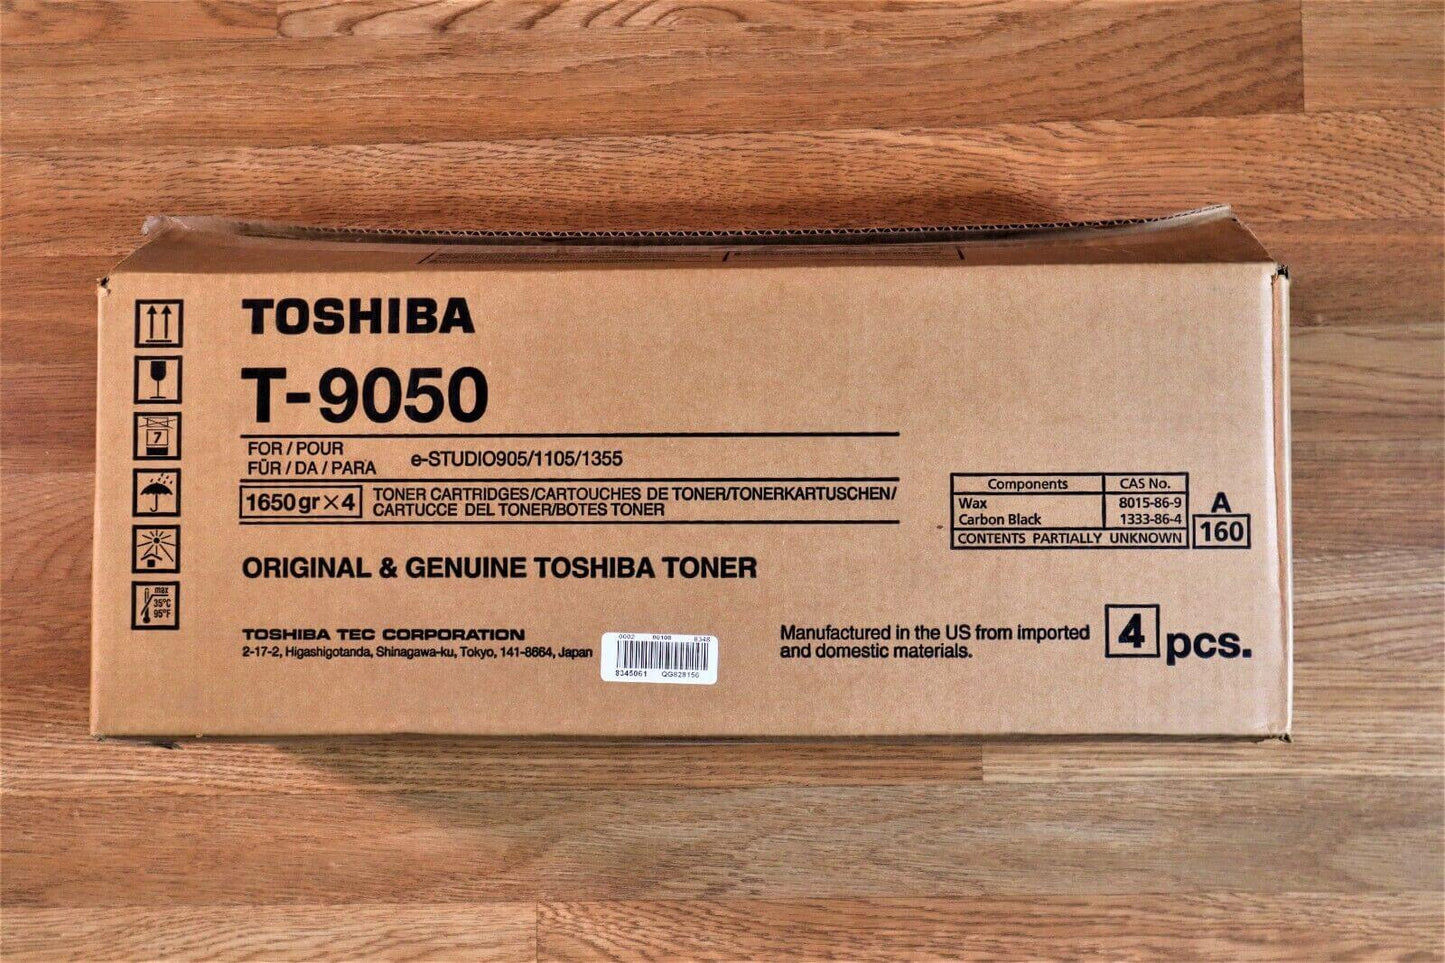 4Pack Toshiba T-9050 Toner Cartridges e-STUDIO905/1105/1355 -Same Day Shipping! - copier-clearance-center